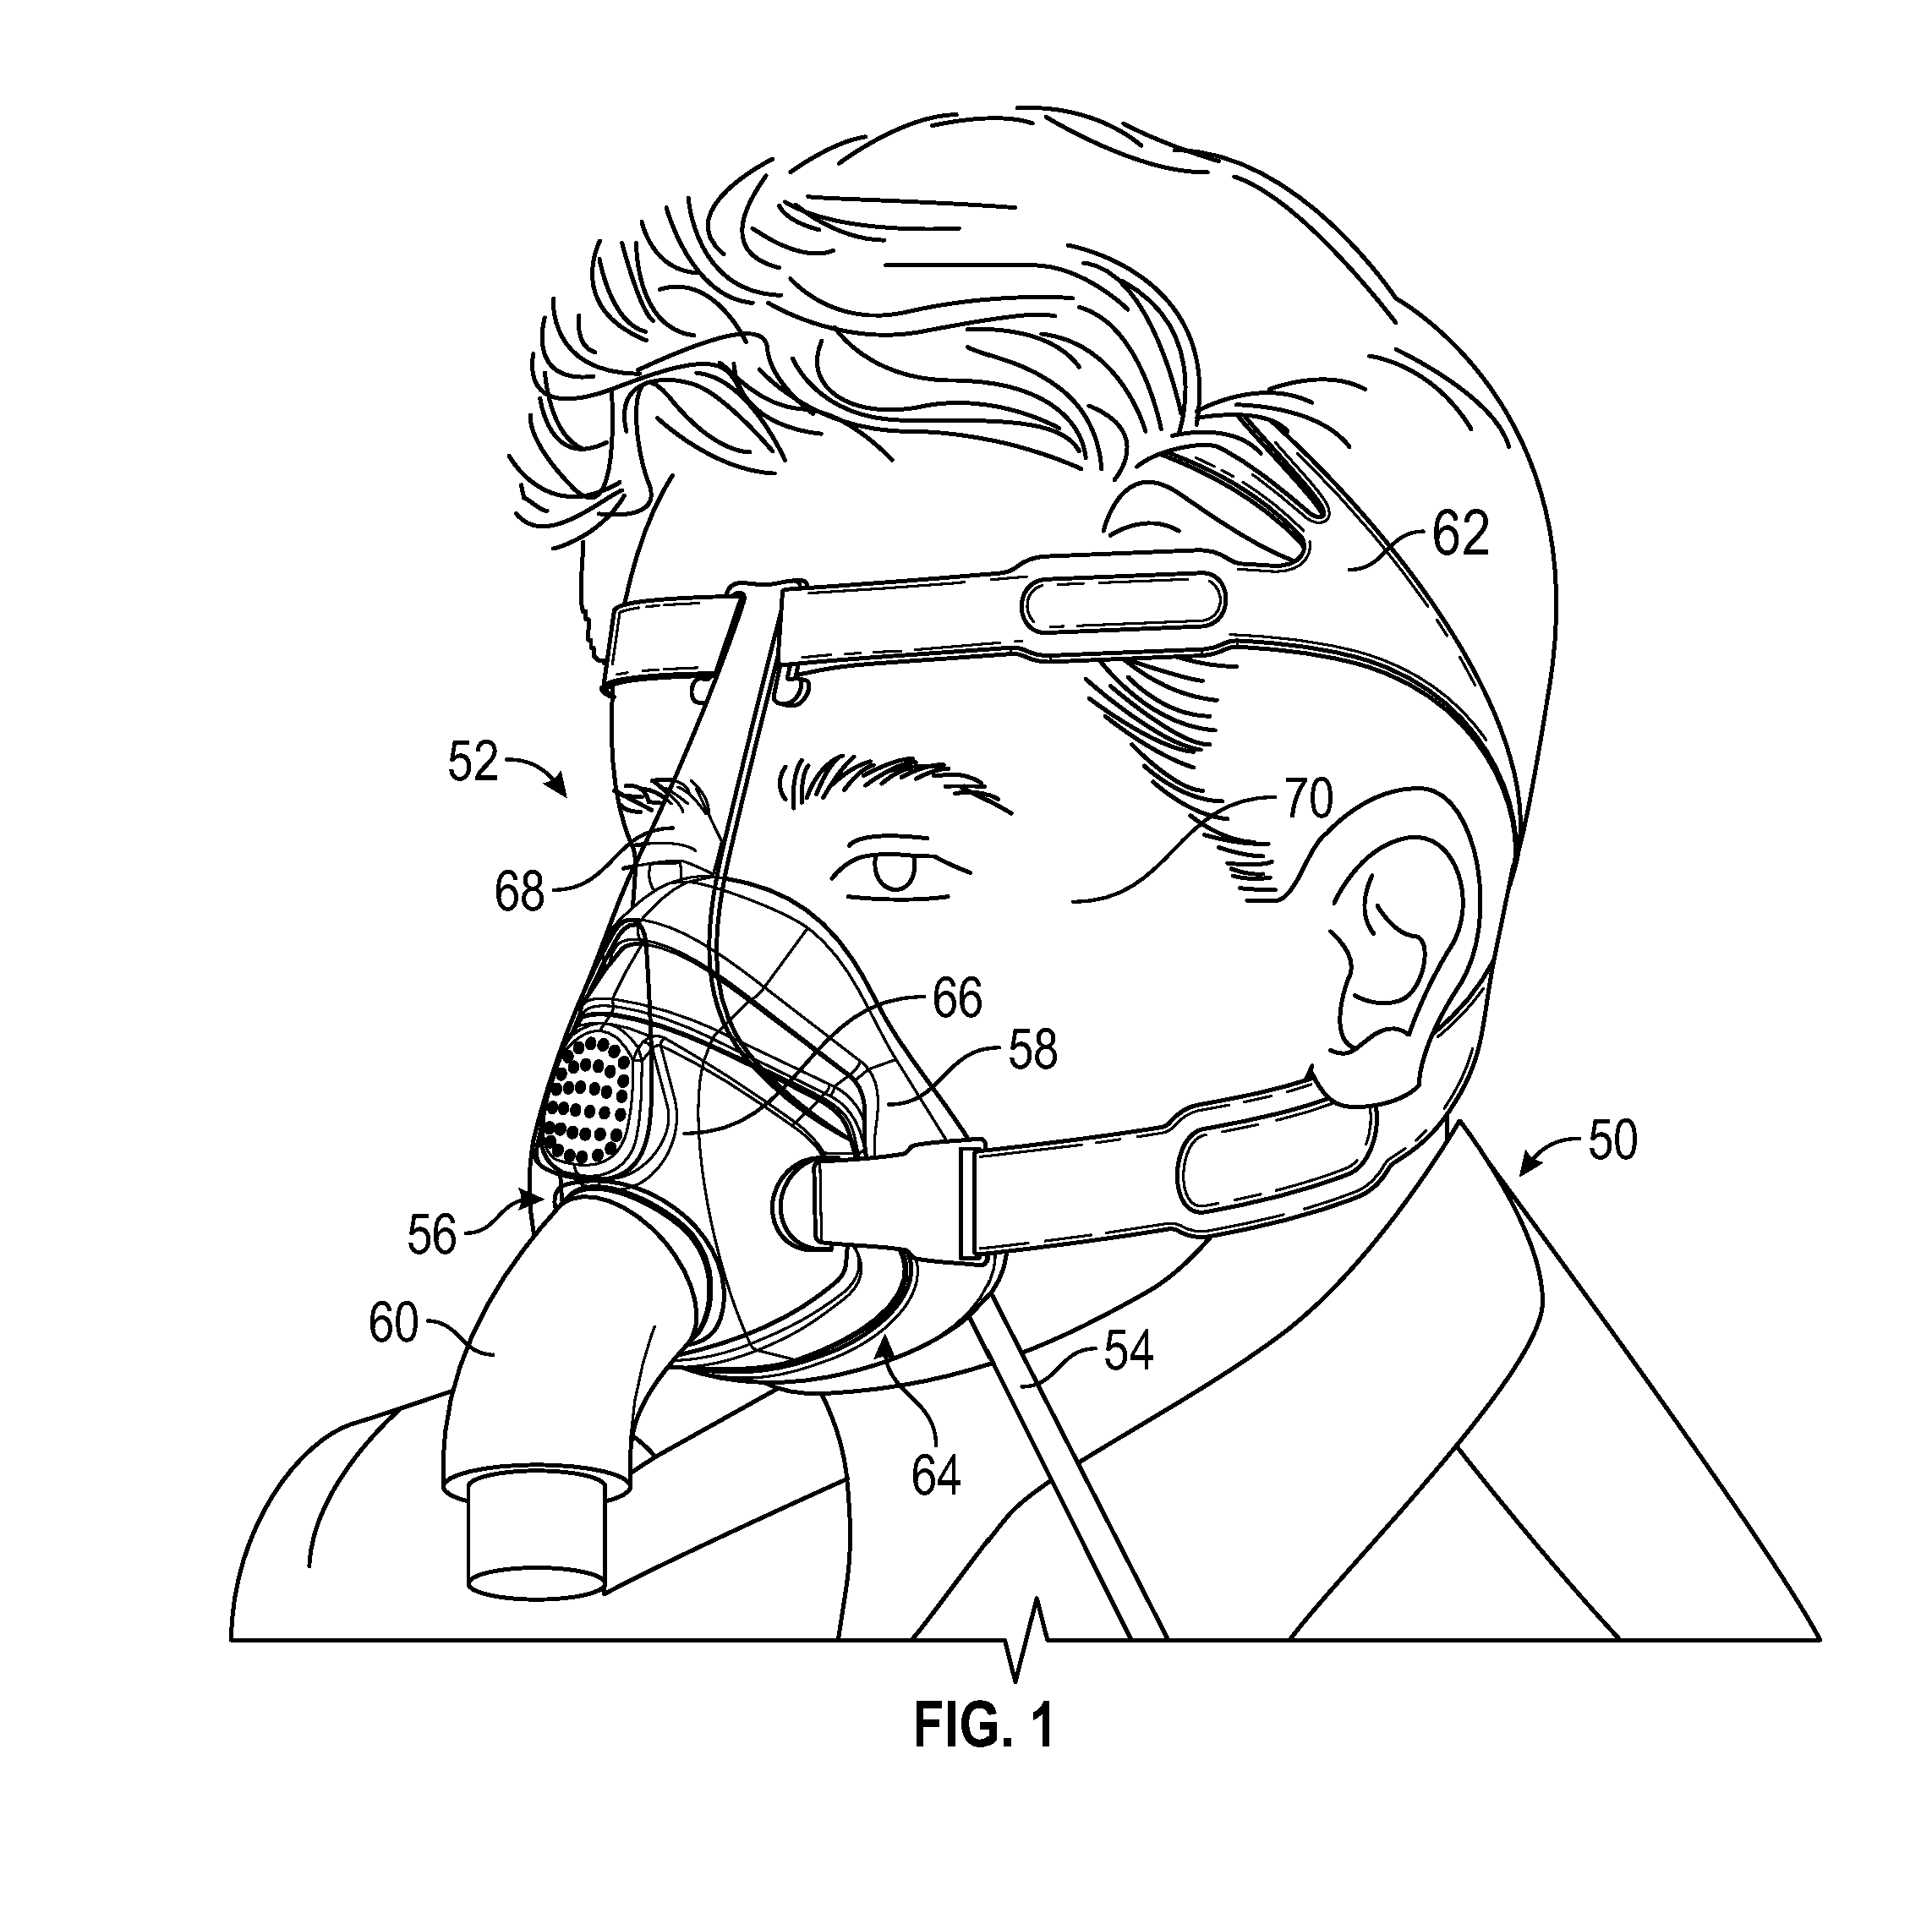 Respiratory mask with nasogastric tube path